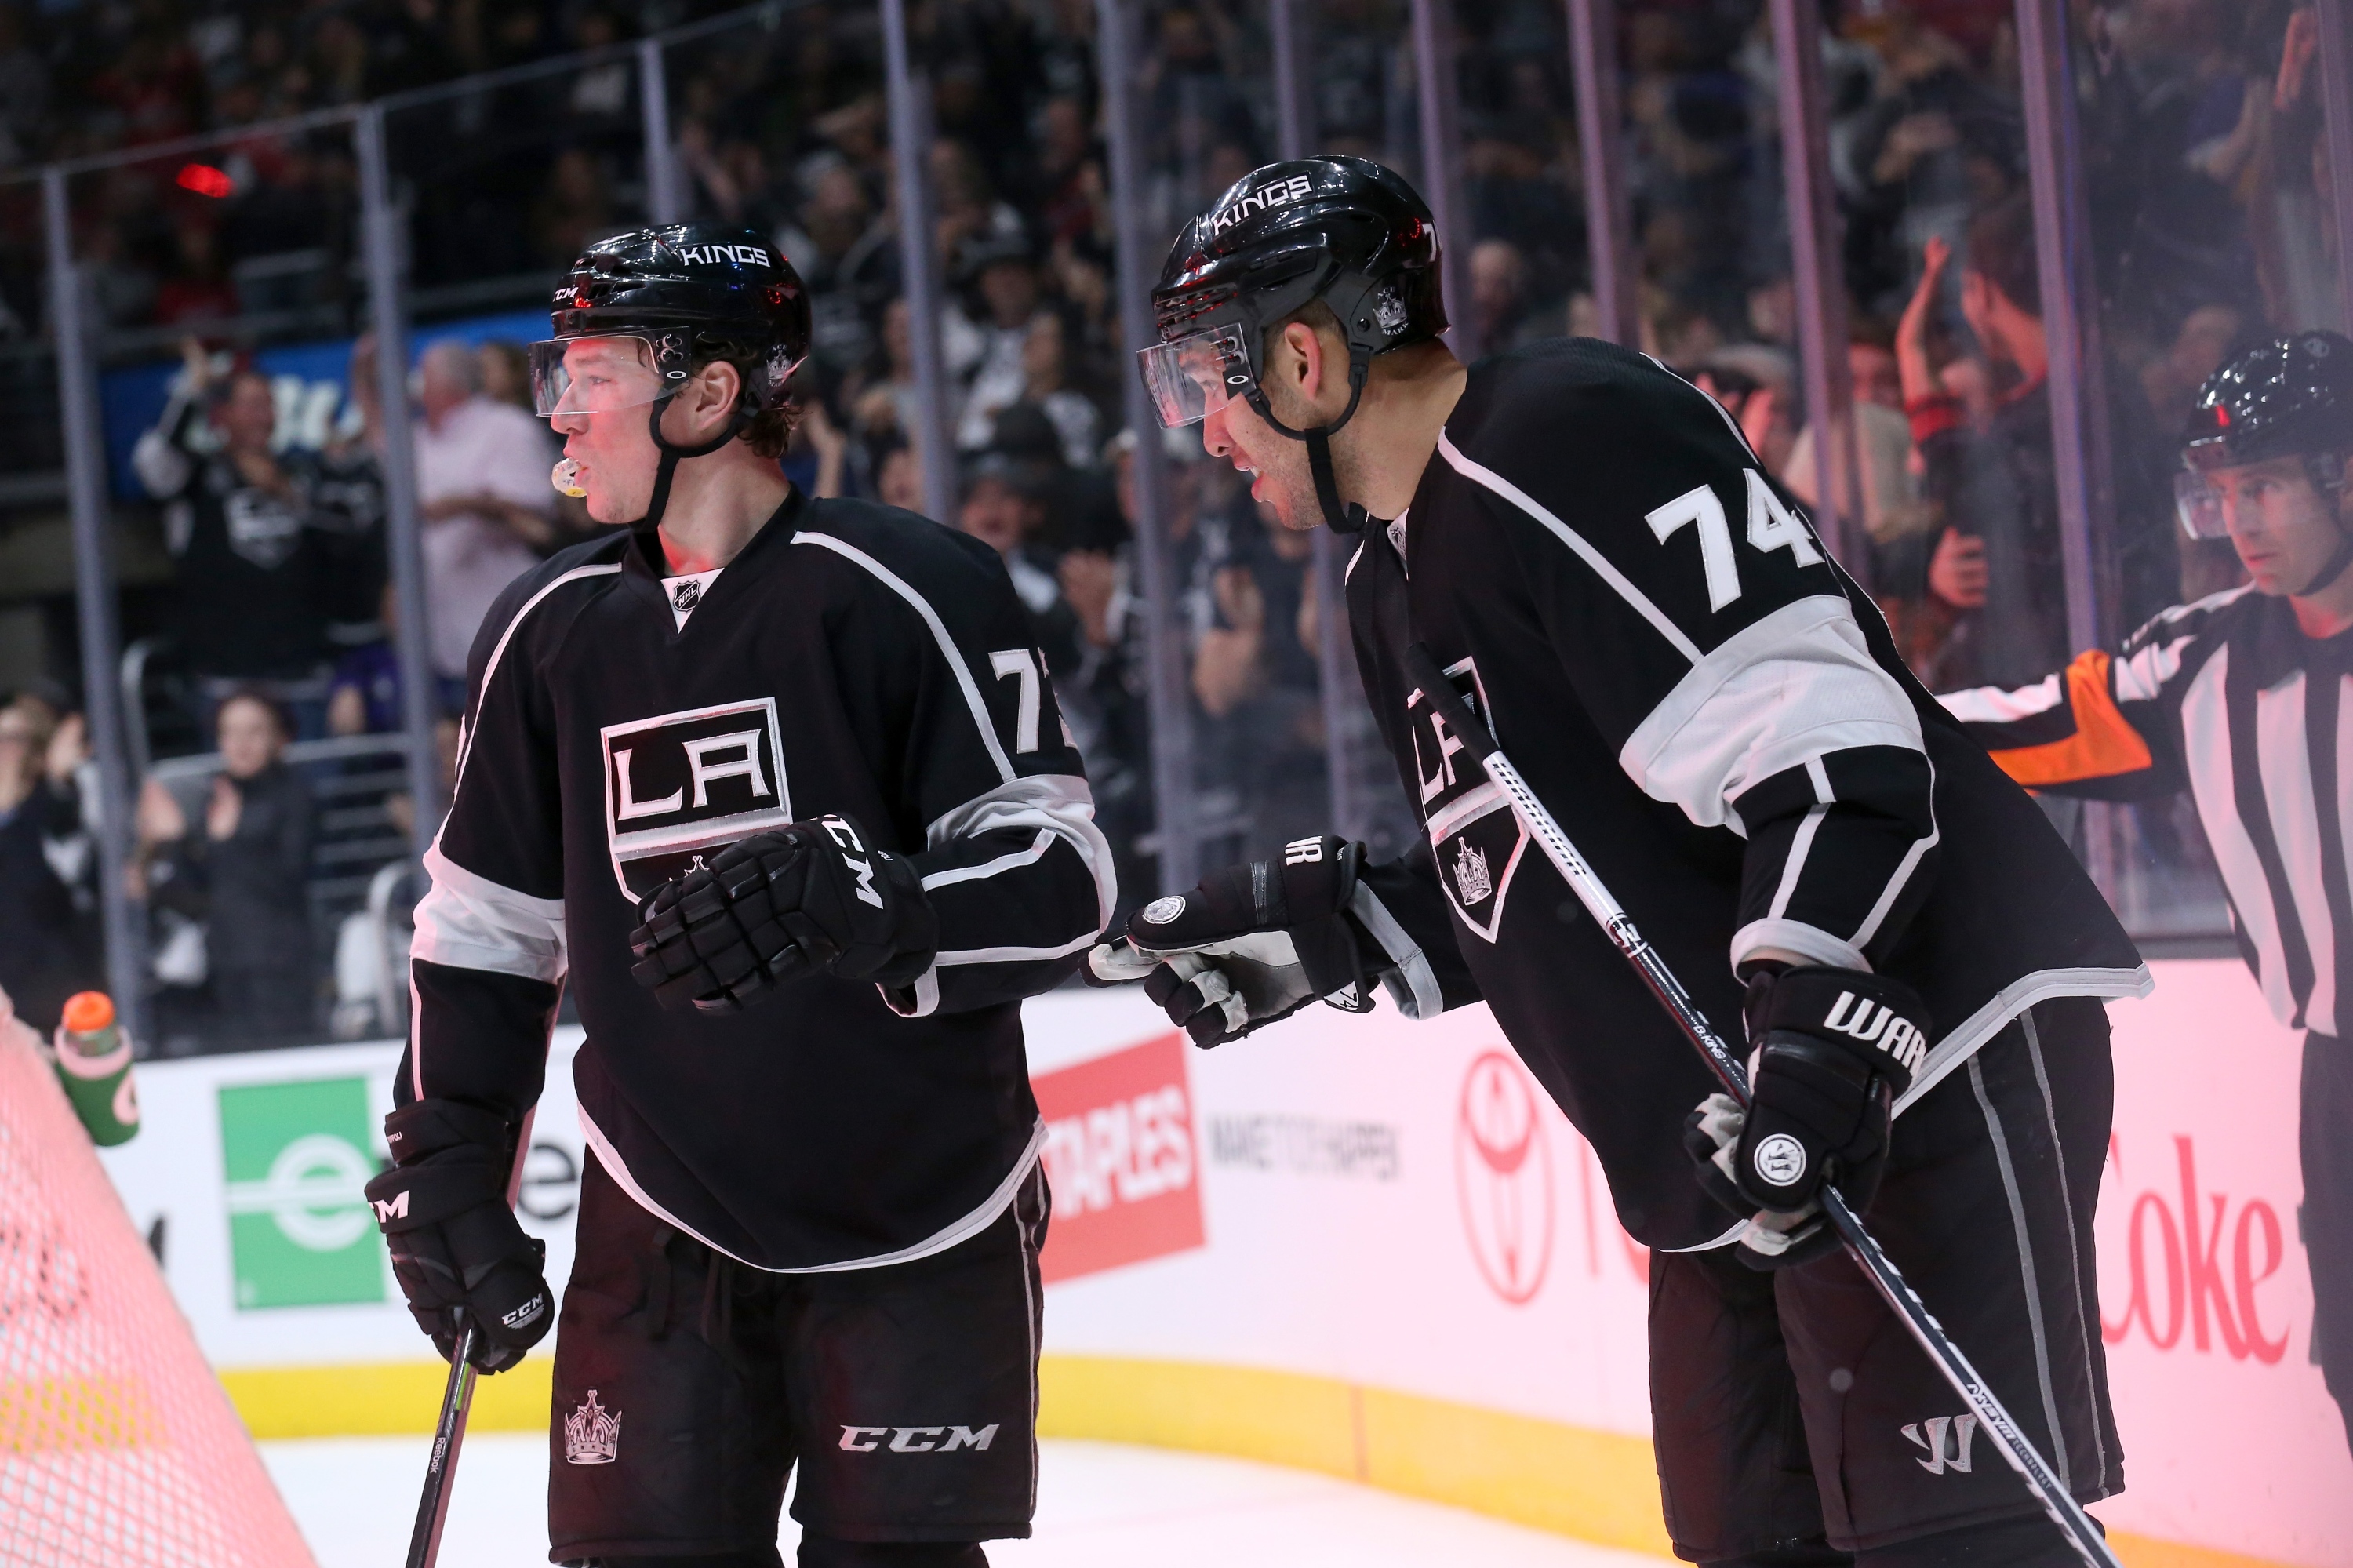 LOS ANGELES, CA - FEBRUARY 14:  Dwight King #74 and Tyler Toffoli #73 of the Los Angeles Kings celebrate after Toffoli assisted on King's second period goal against the Washington Capitals at Staples Center on February 14, 2015 in Los Angeles, California.  (Photo by Stephen Dunn/Getty Images)